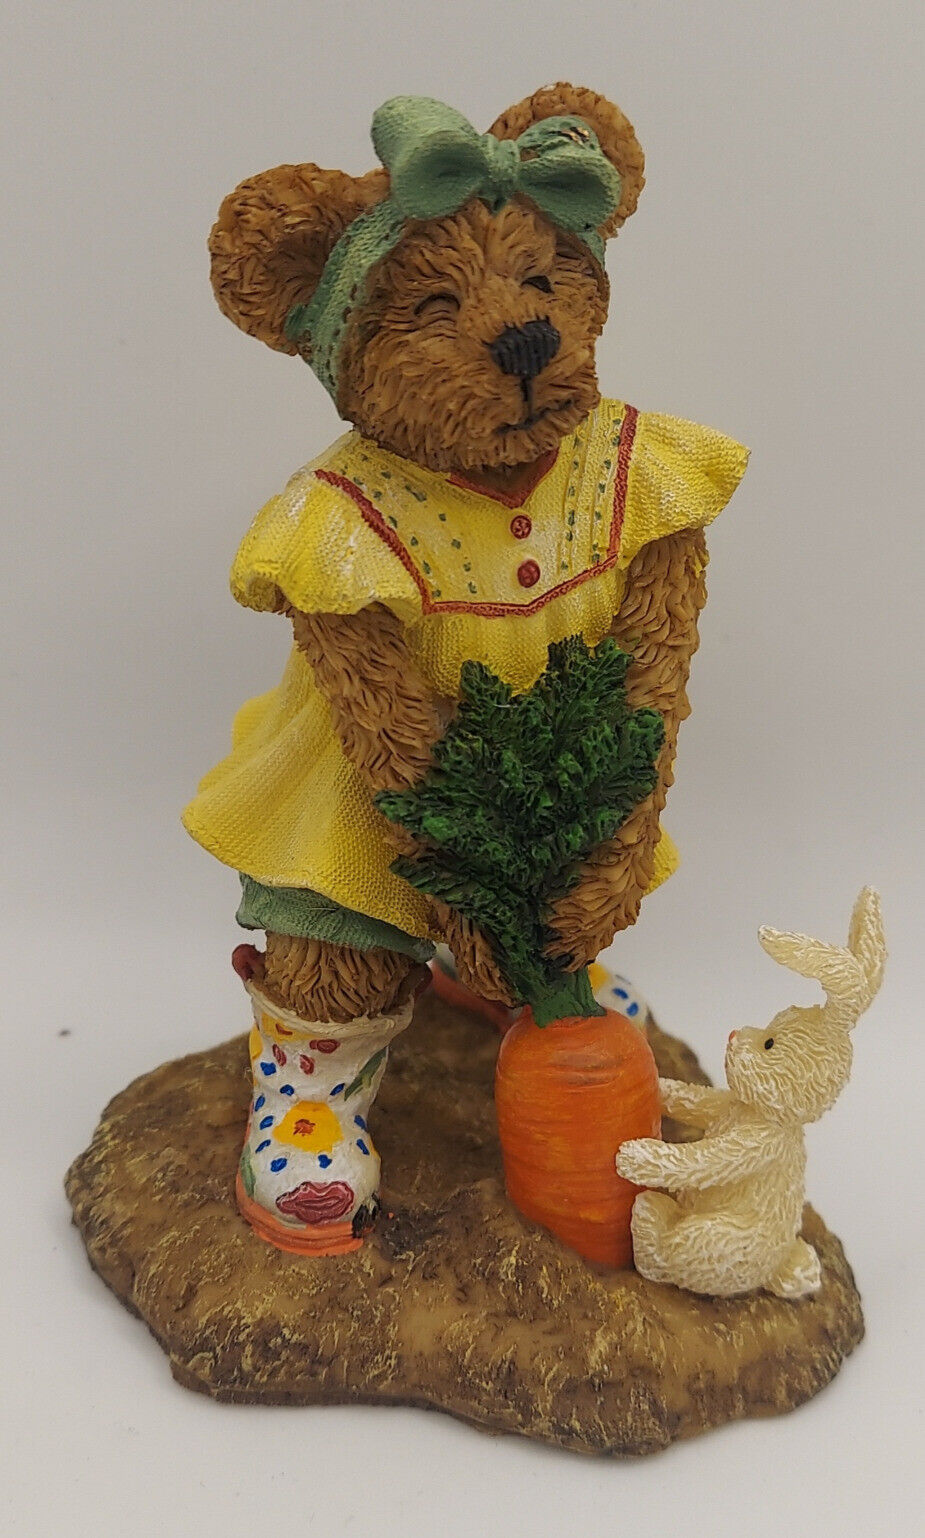 2013 Boyds Bears Bearstone Collection Sophie Sowinseed w/ Hopper...Tug of War